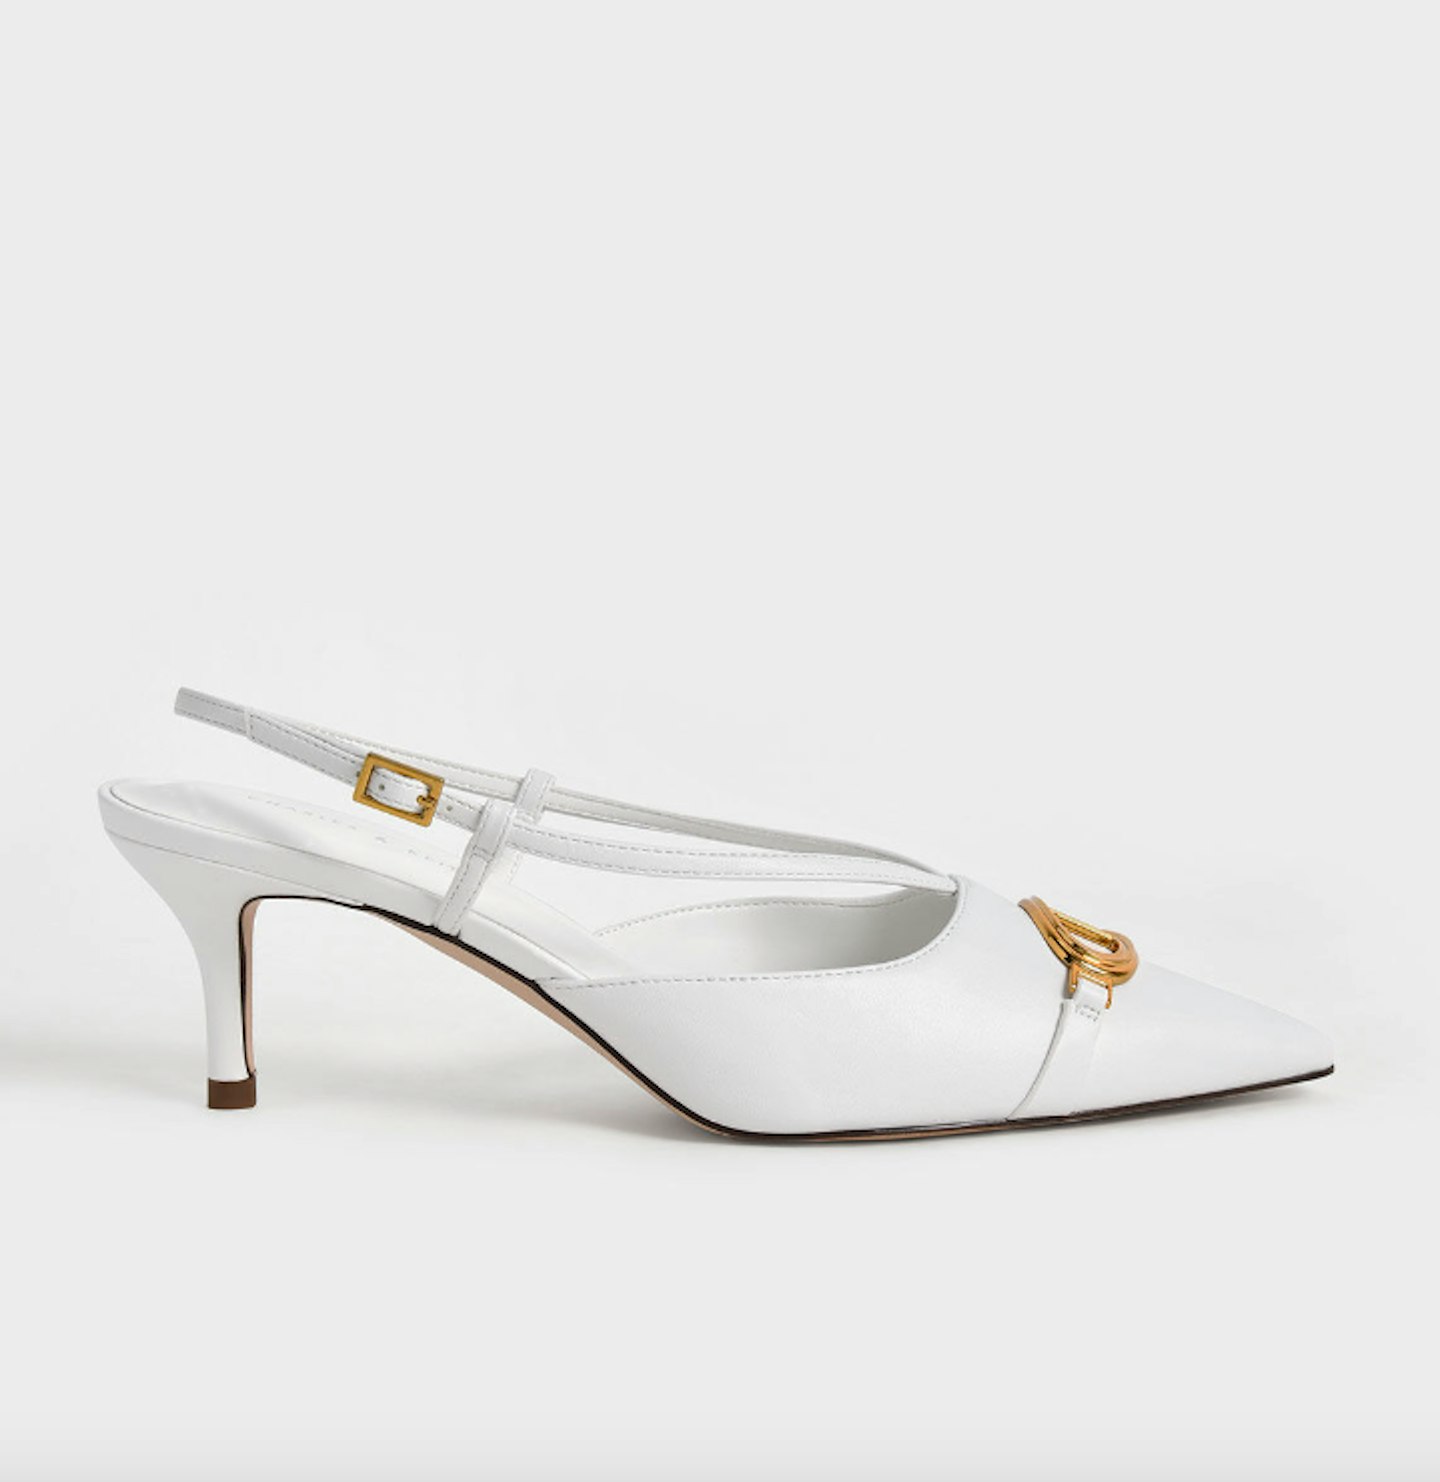 Charles & Keith, Metallic Accent Slingback Pumps